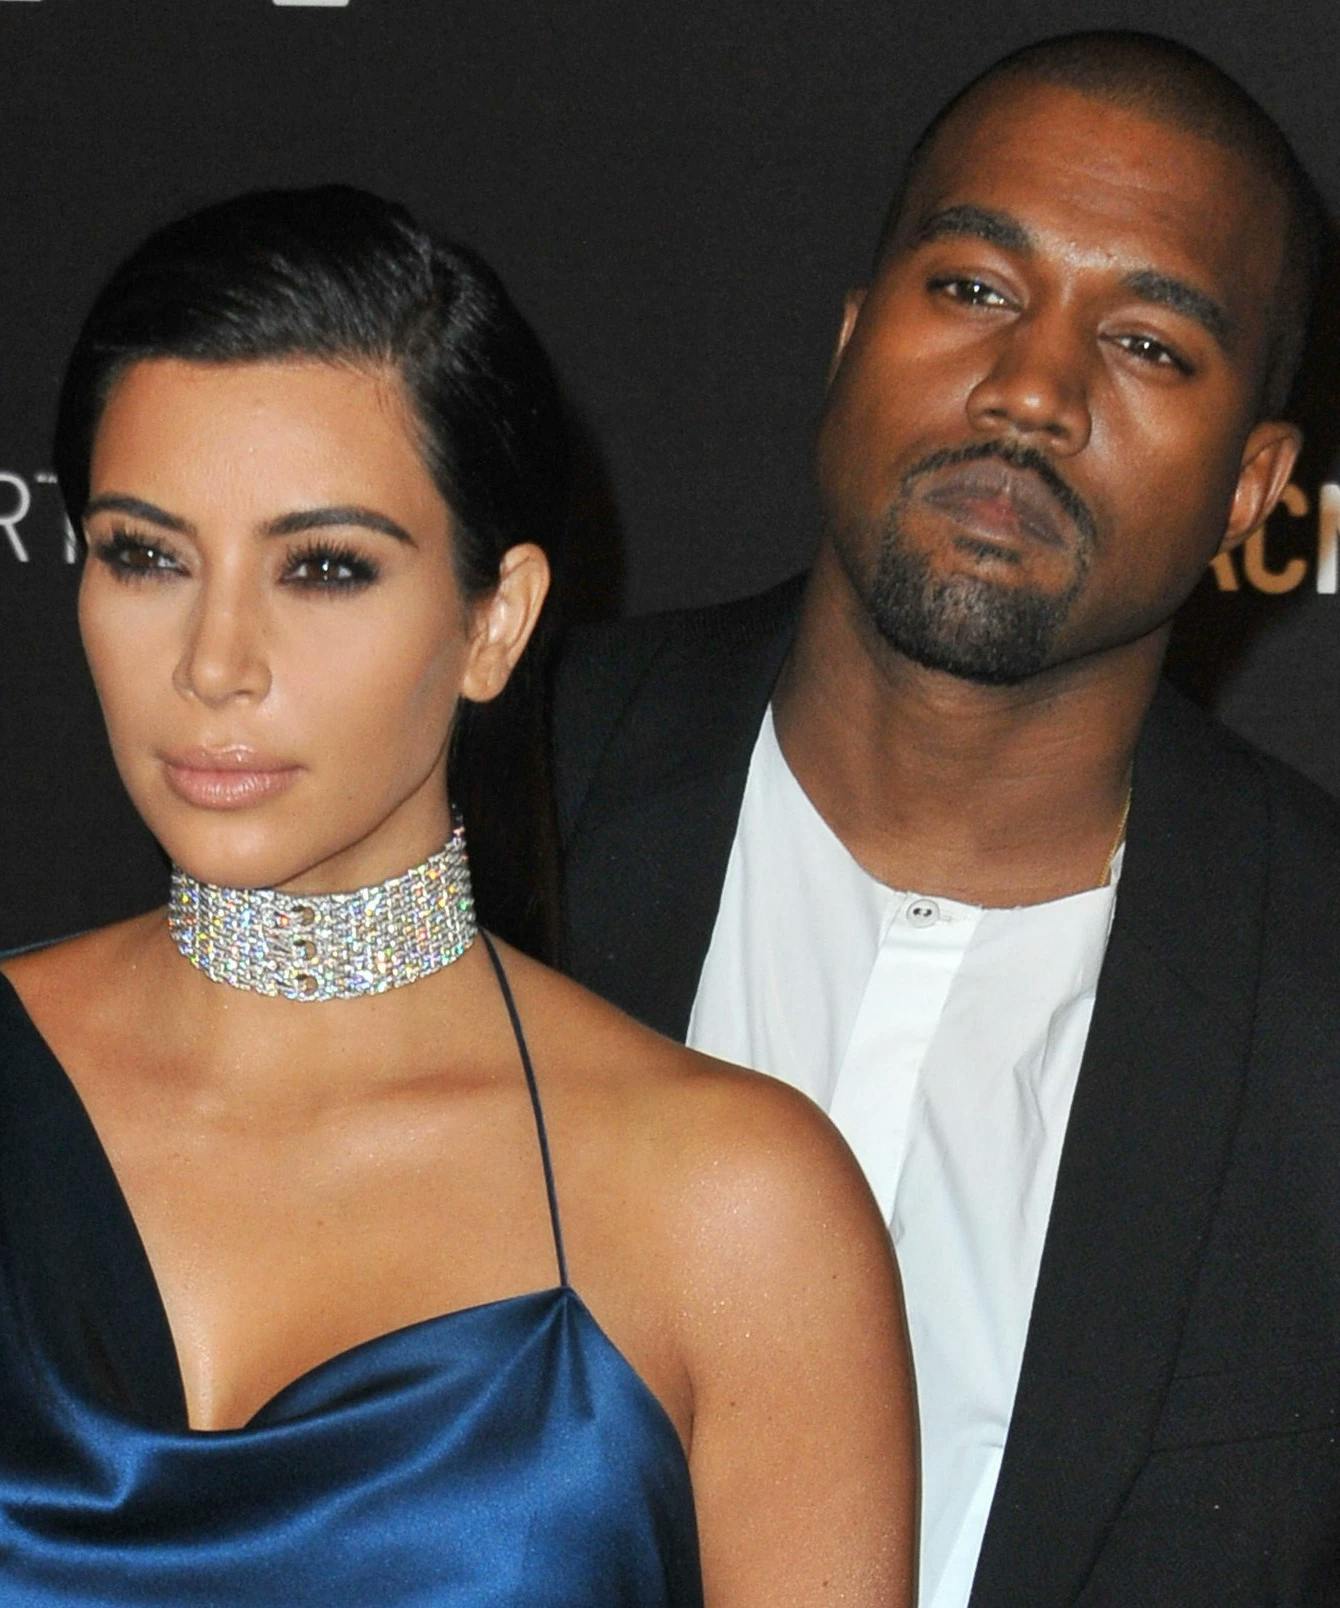 Divorce Is Imminent For Kim Kardashian And Kanye West Sources Say